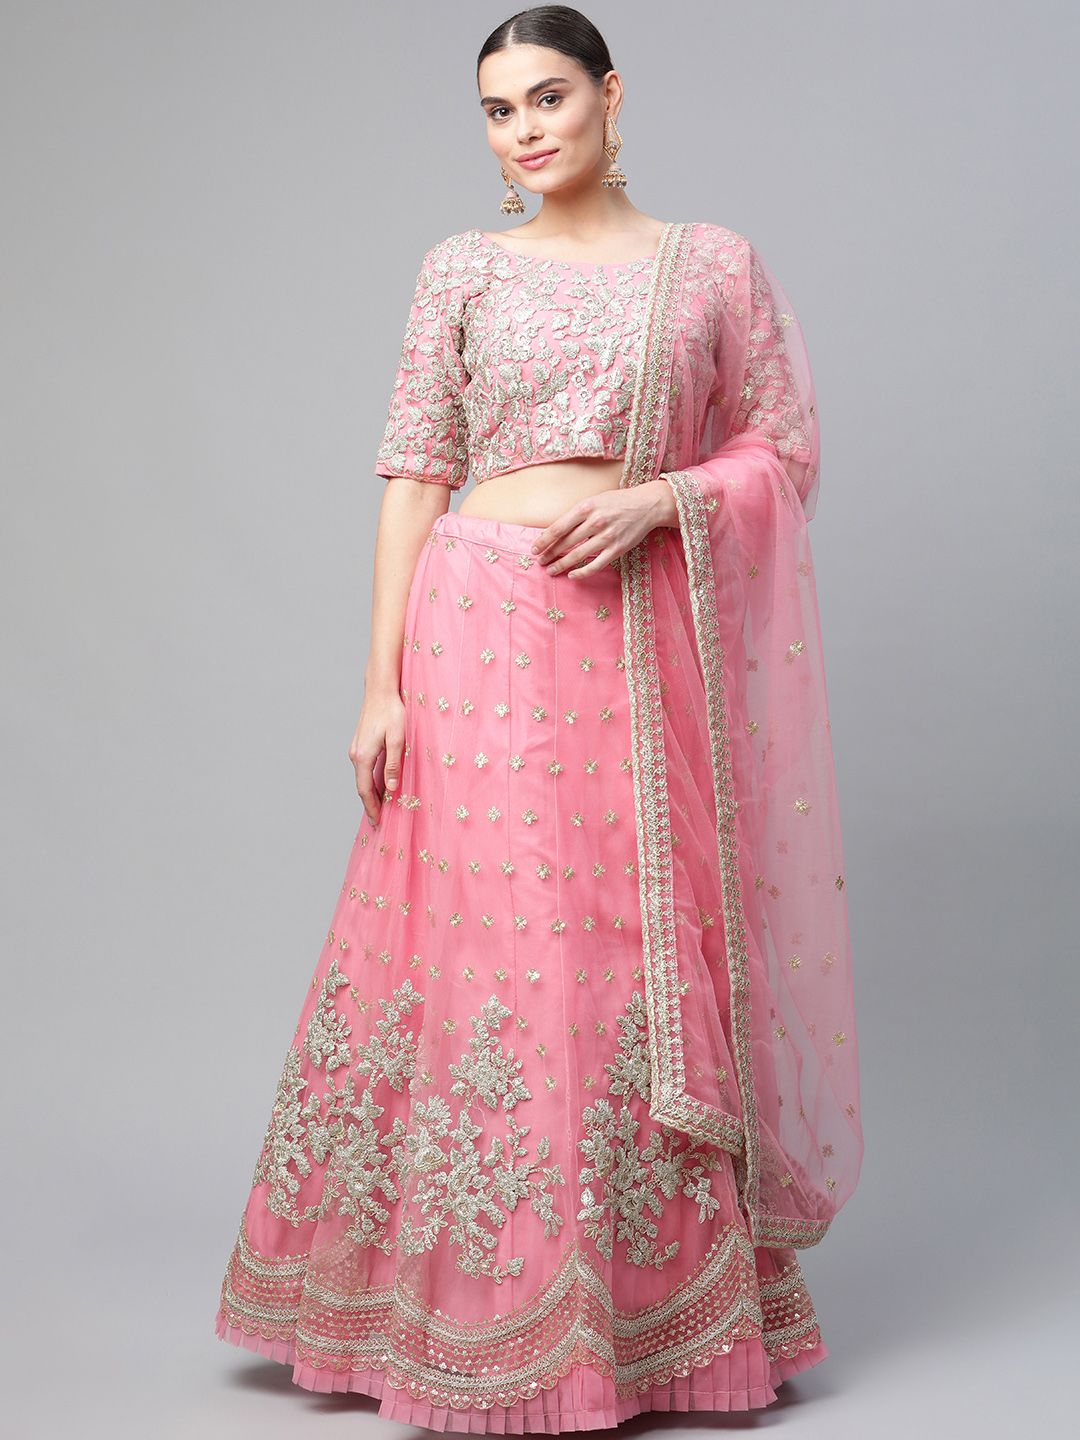 Readiprint Fashions Pink & Gold-Toned Semi-Stitched Lehenga & Unstitched Blouse Price in India